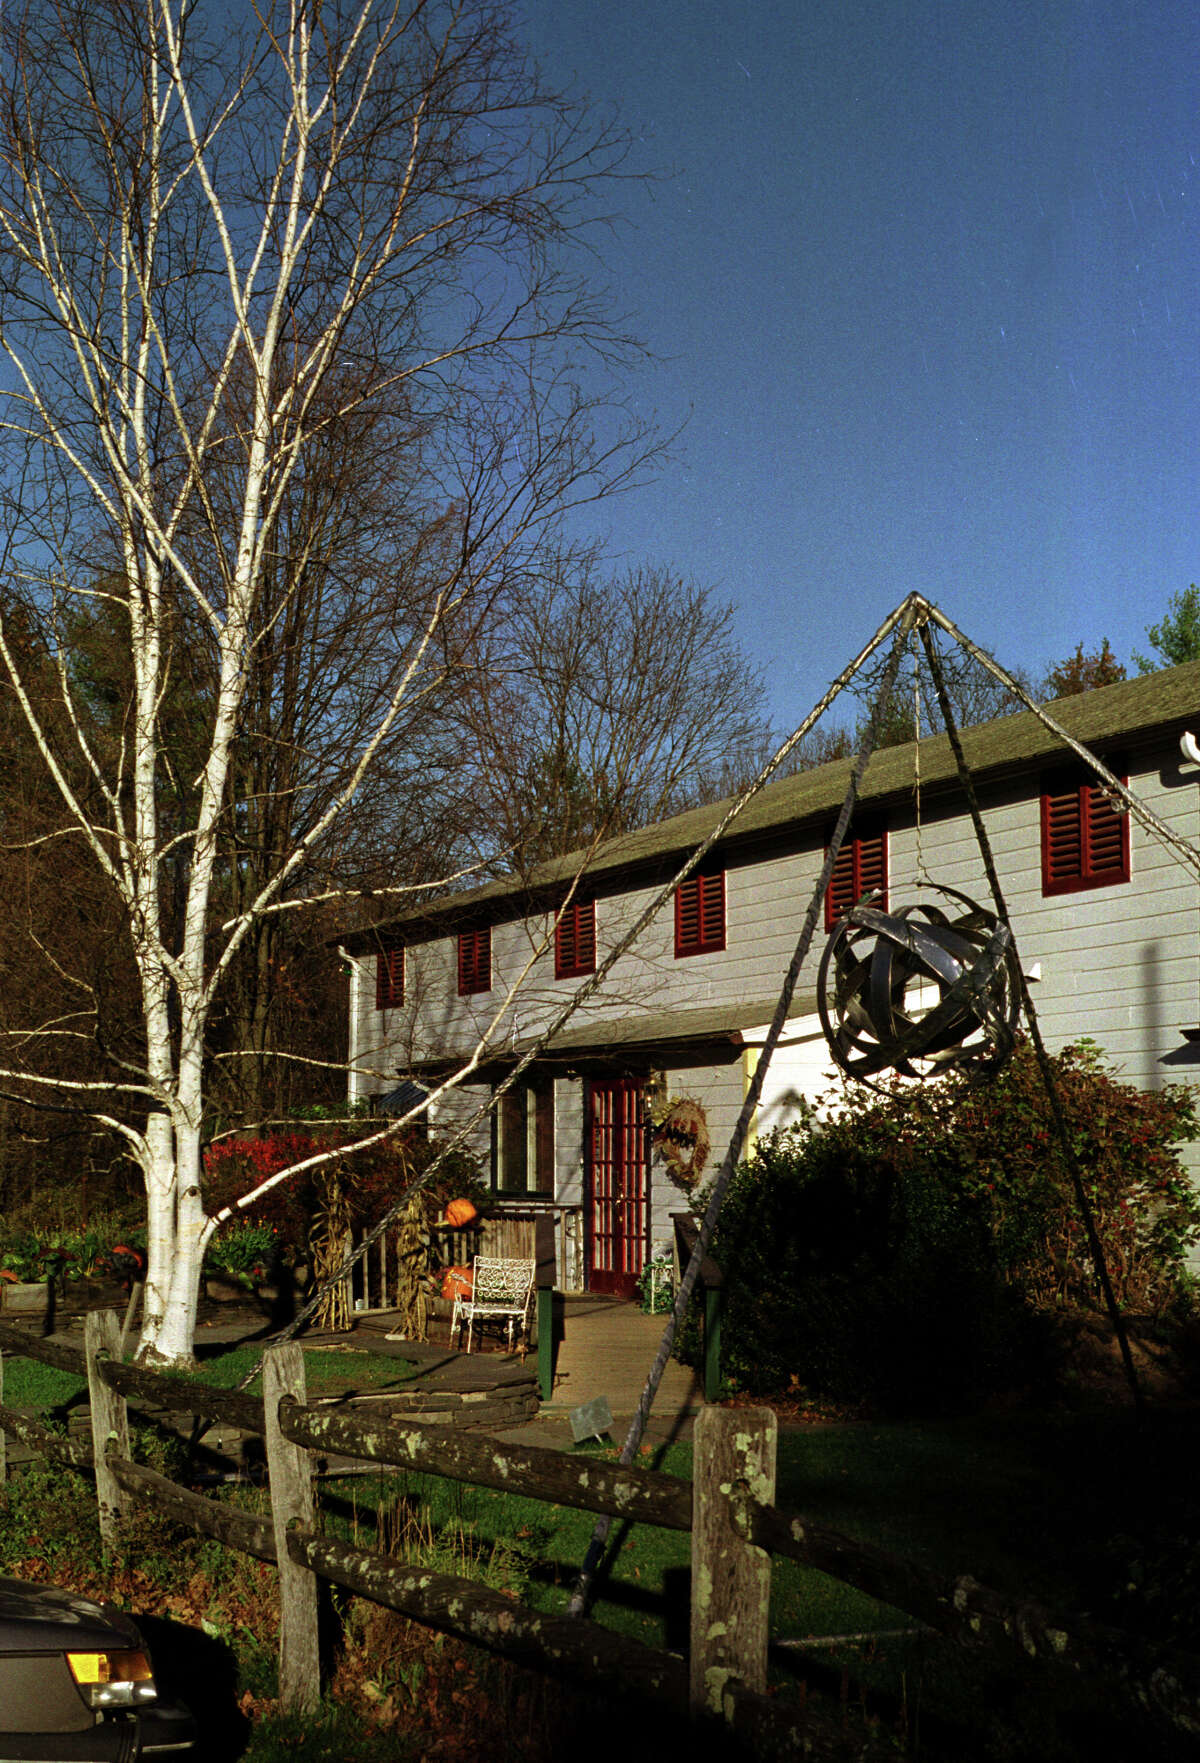 Times Union Staff Photo by Ruth Fantasia -- Exterior of the New World Home Cooking Co. in Woodstock, NY on Saturday October 28, 2000.